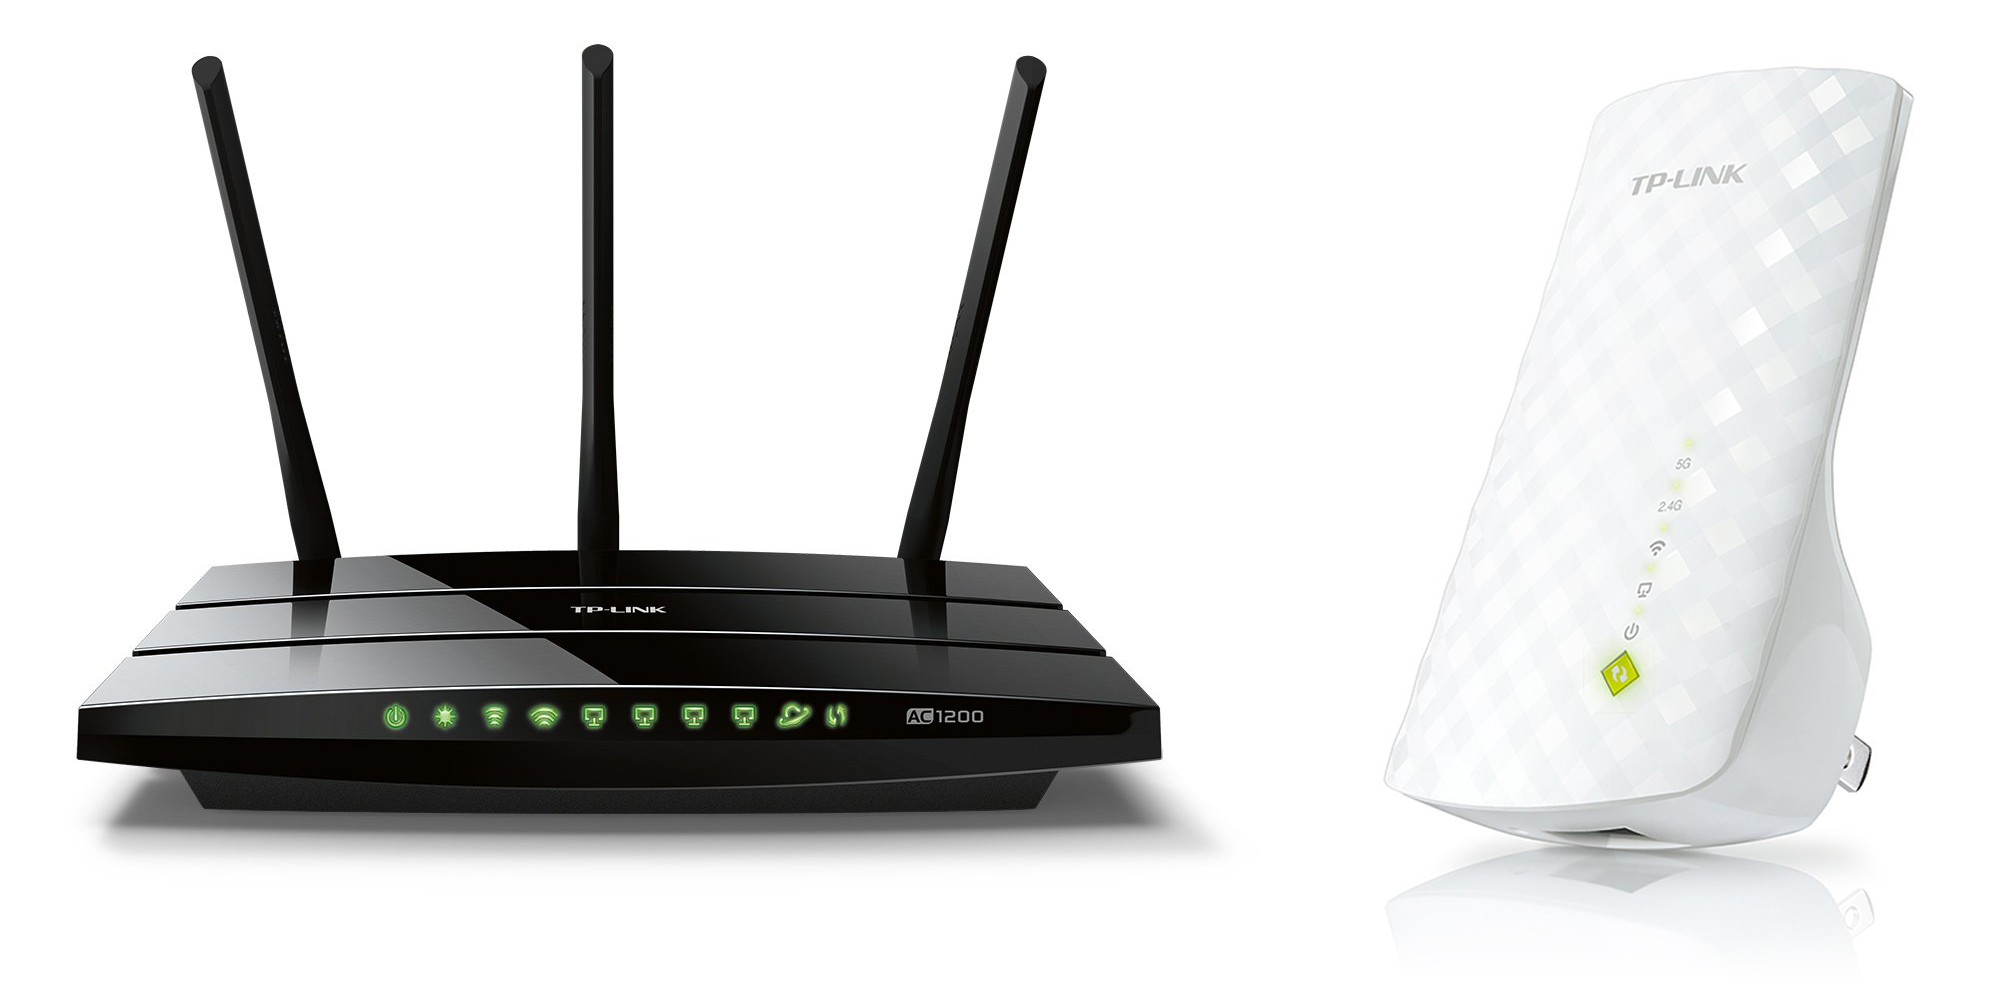 Cater Bounty jury Networking: TP-LINK Archer C5 802.11ac Router + Wi-Fi Extender $105 shipped  ($135 value), more